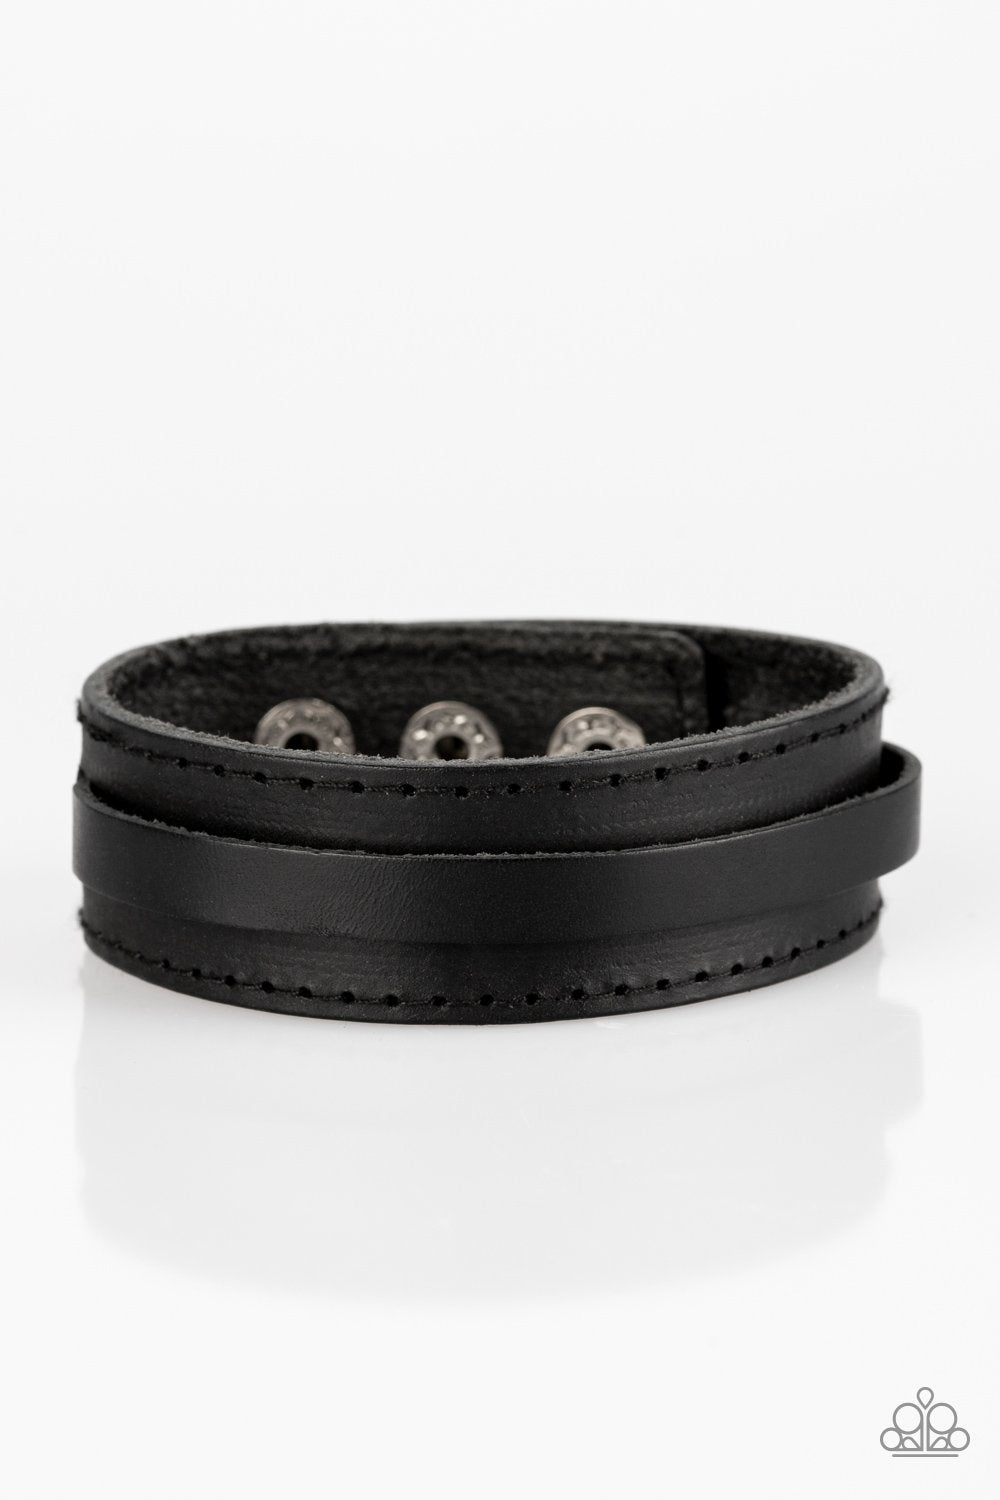 Scenic Scout Black Leather Mens Urban Wrap Snap Bracelet - Paparazzi Accessories-CarasShop.com - $5 Jewelry by Cara Jewels